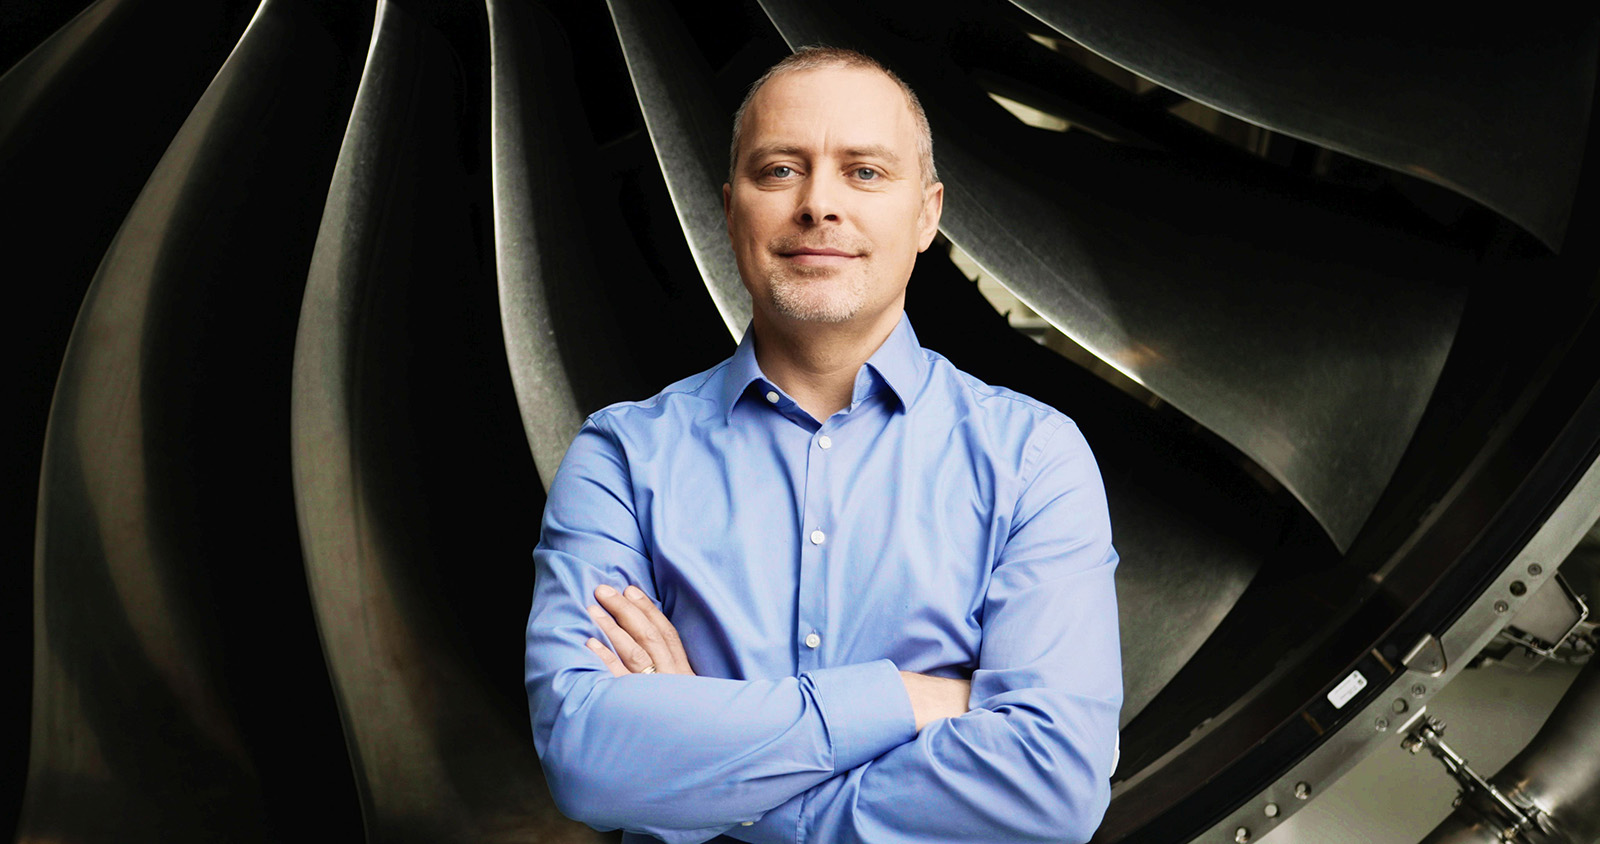 The research project was developed in close cooperation with the engine specialist Rolls-Royce. For his scientific achievement Dr. Dan Roth-Fagaraseanu of industrial partner Rolls-Royce was awarded the Joseph von Fraunhofer Prize.